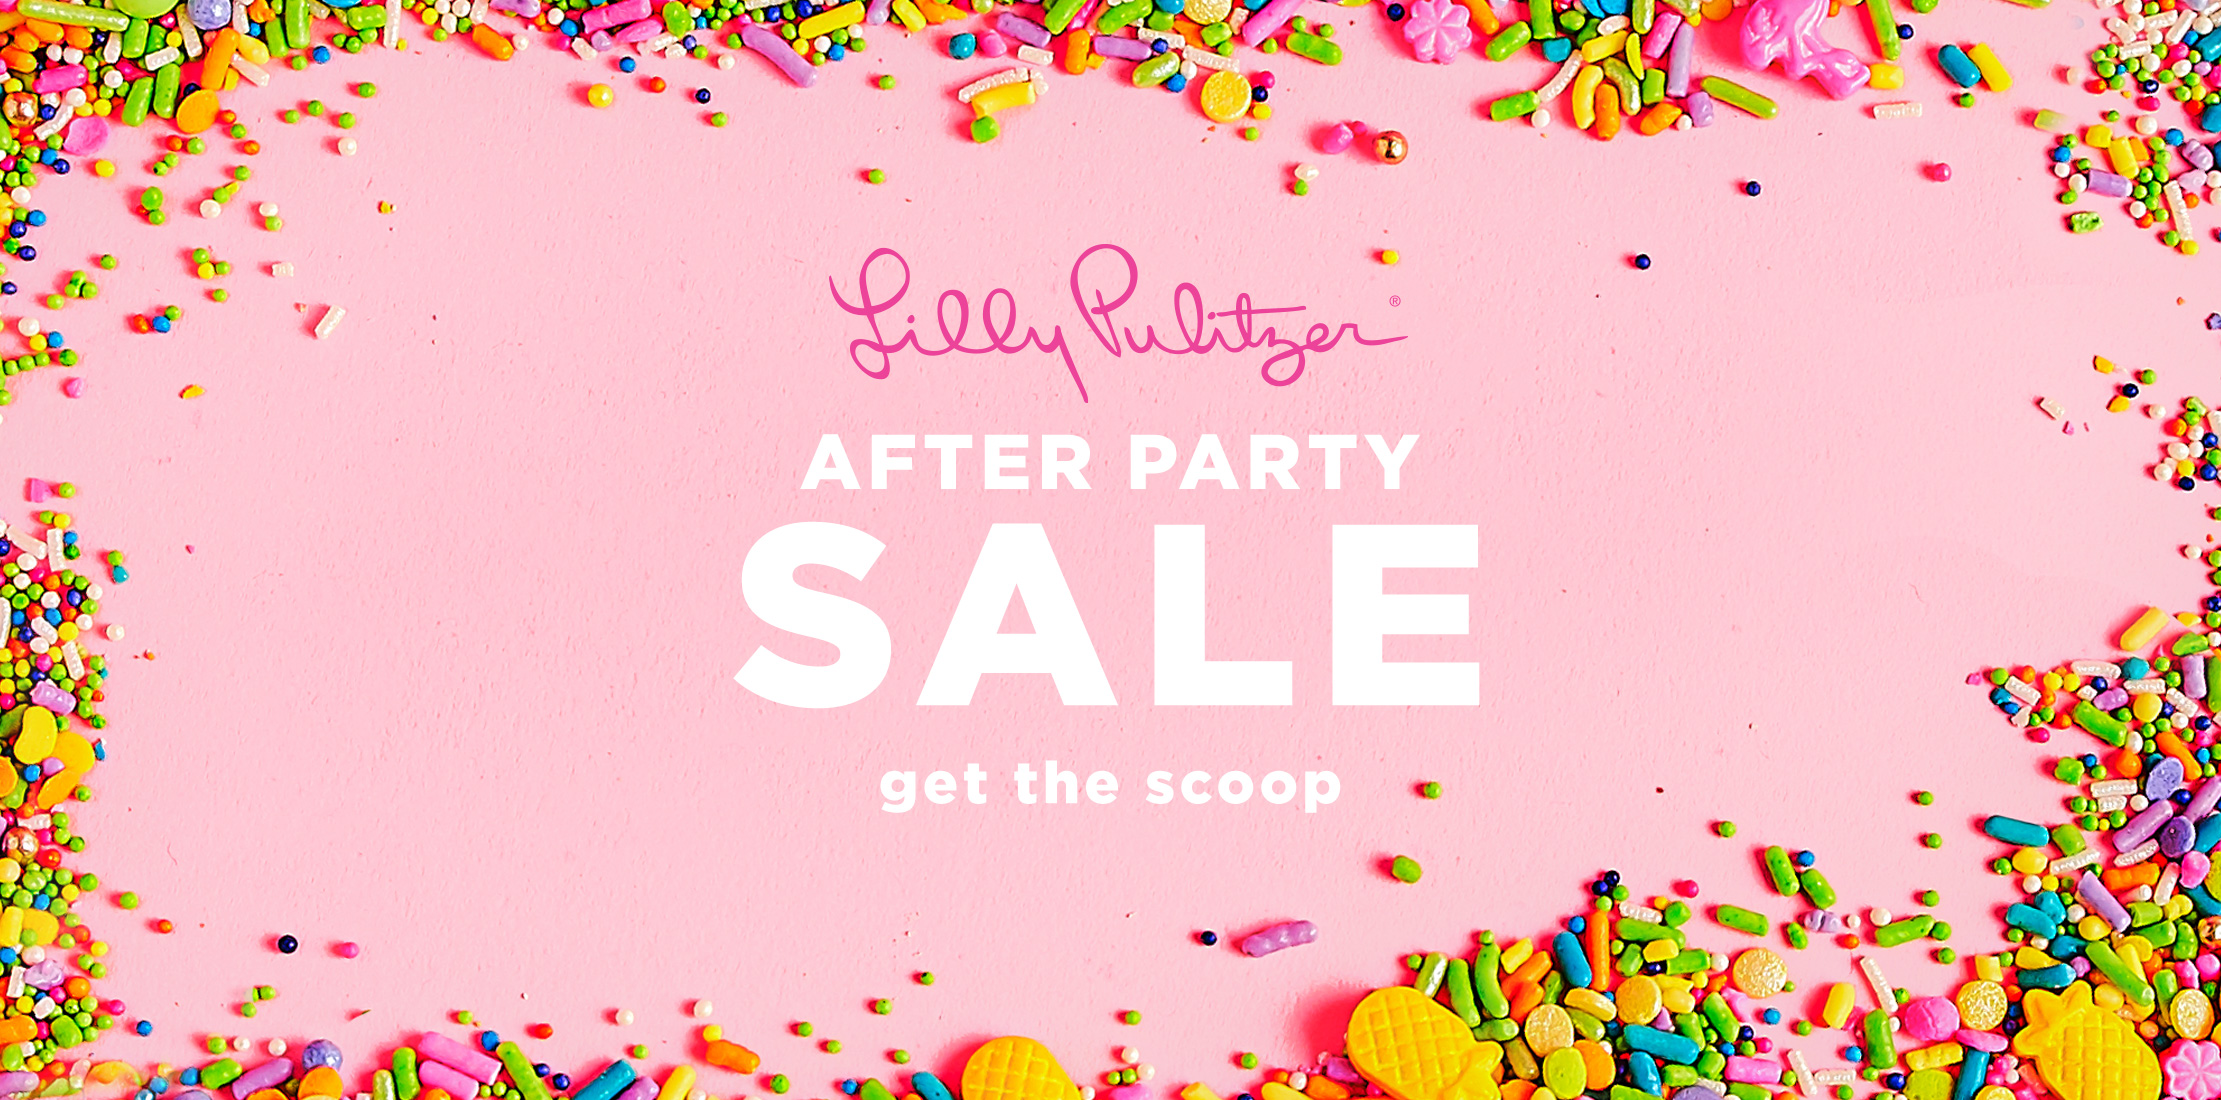 Lilly Pulitzer After Party Sale get the scoop